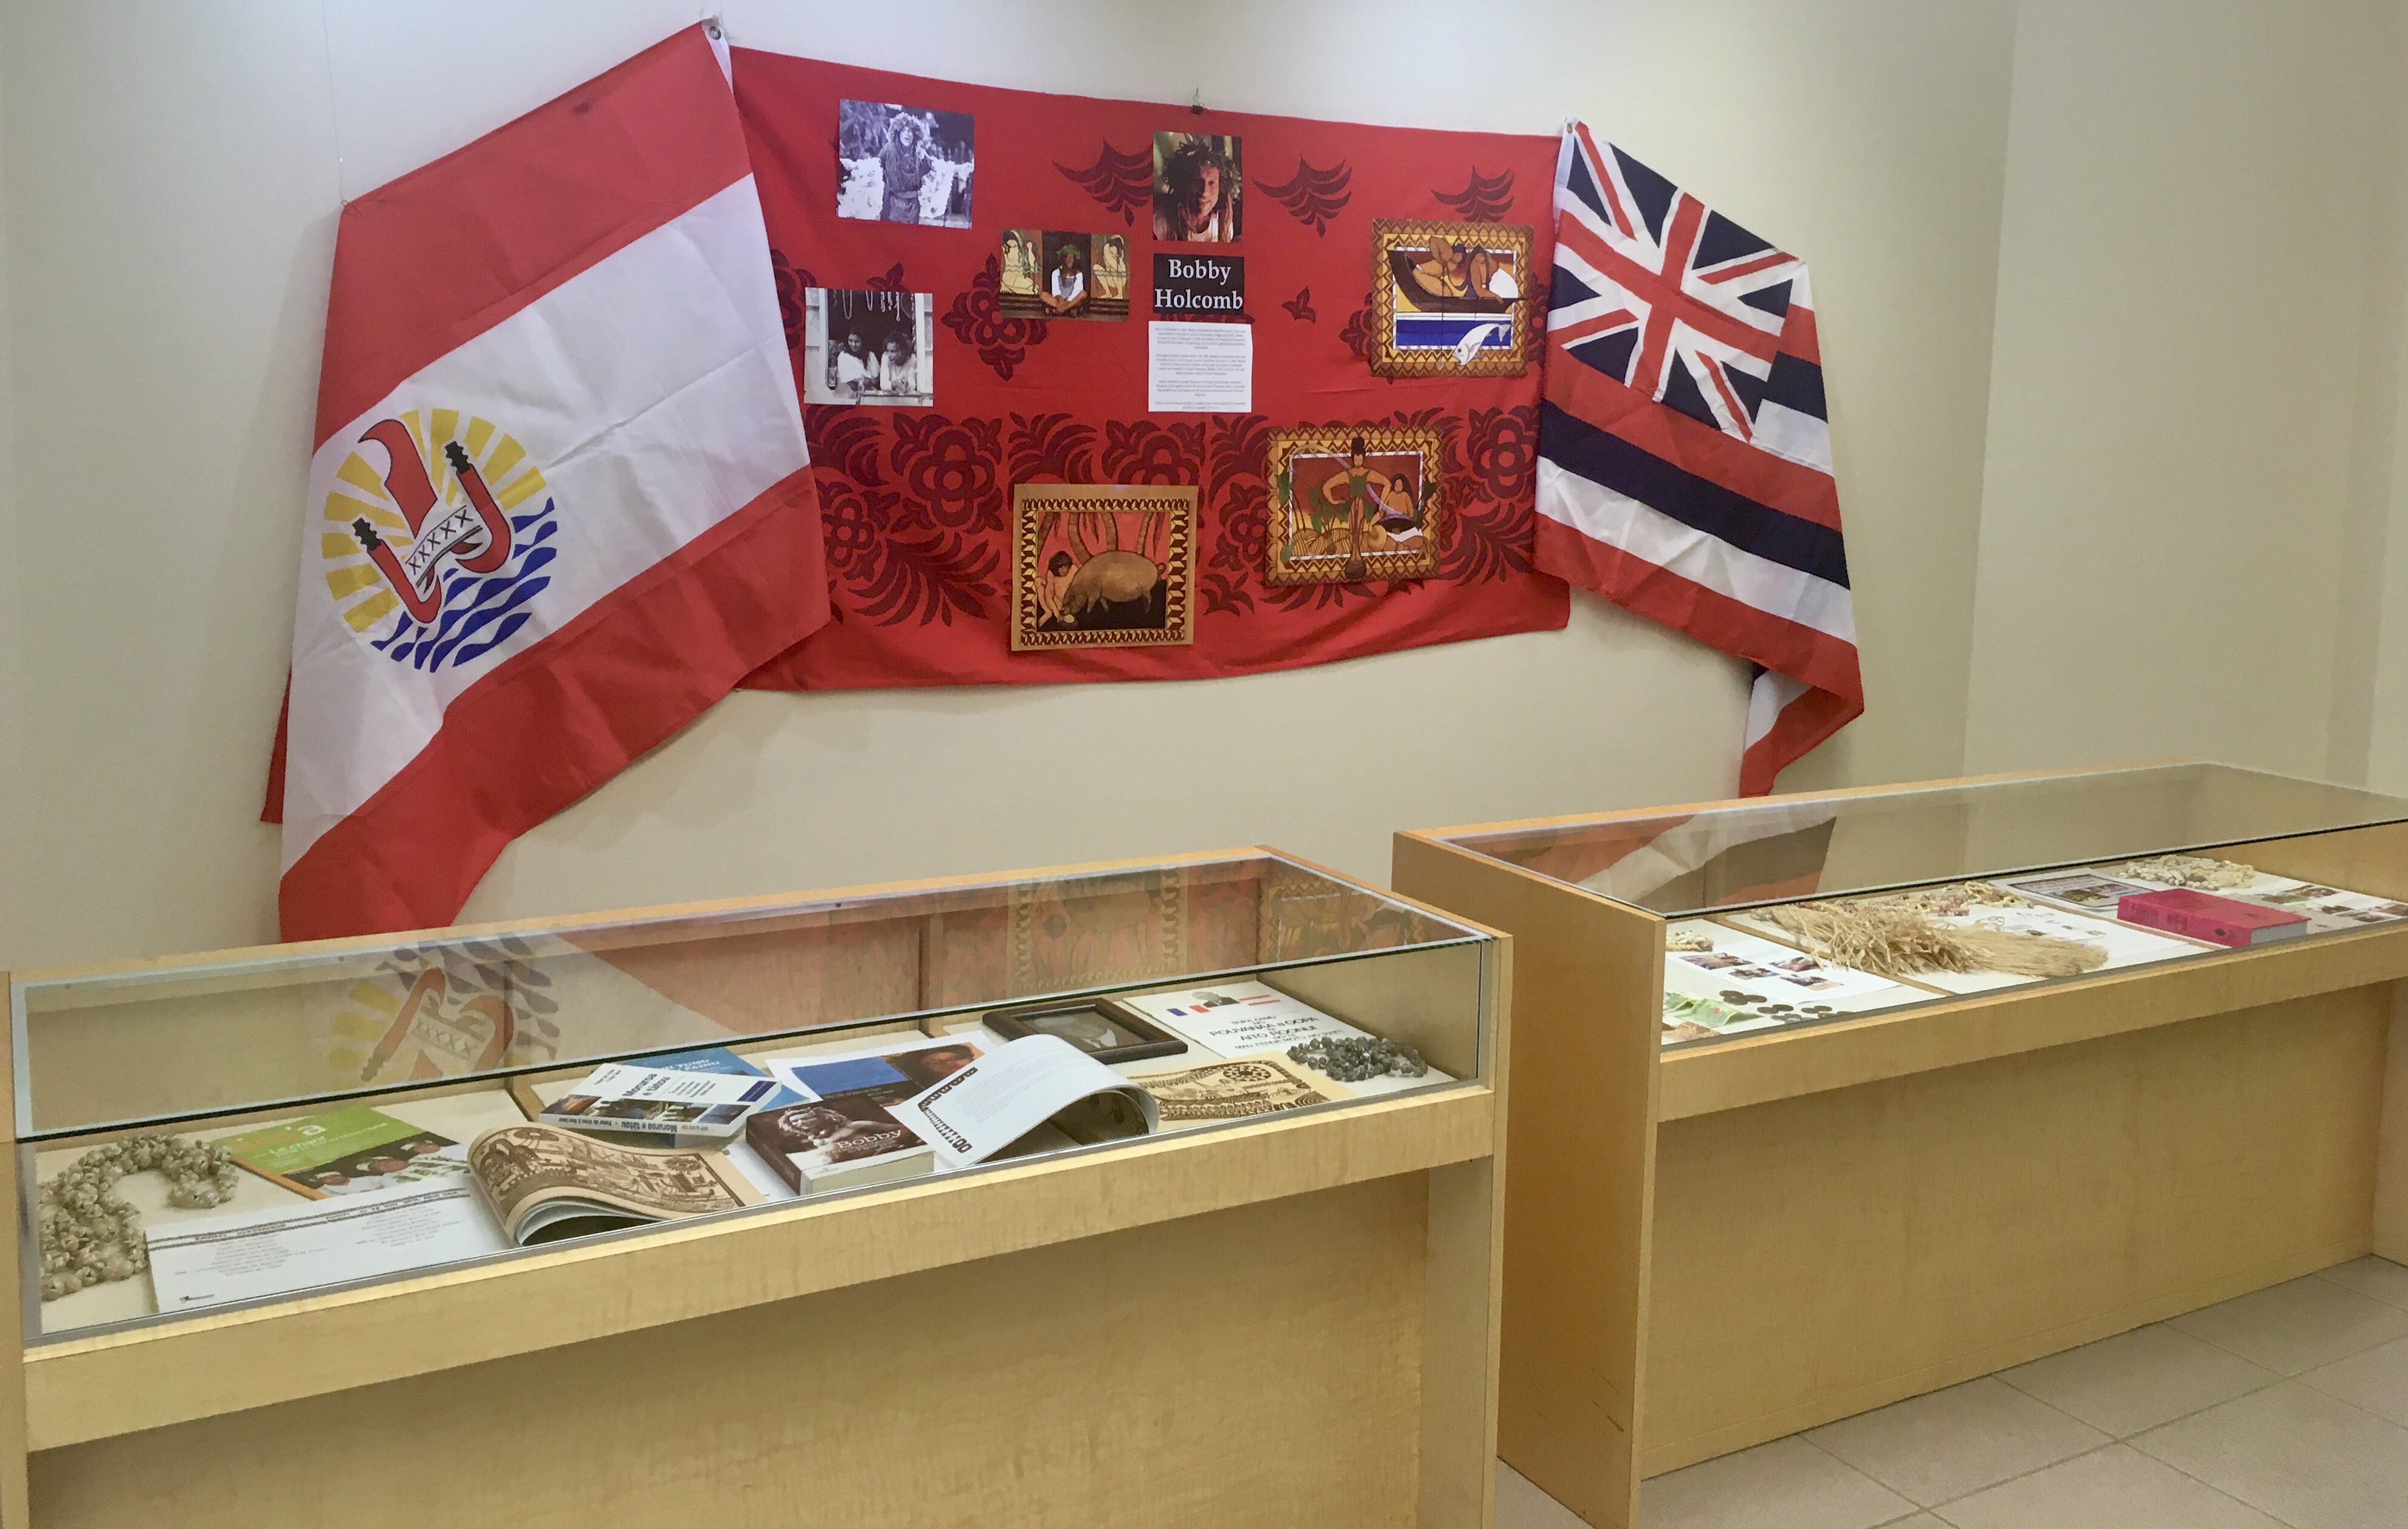 A display for Bobby Holcomb flanked by the flags of french polynesia and hawaii